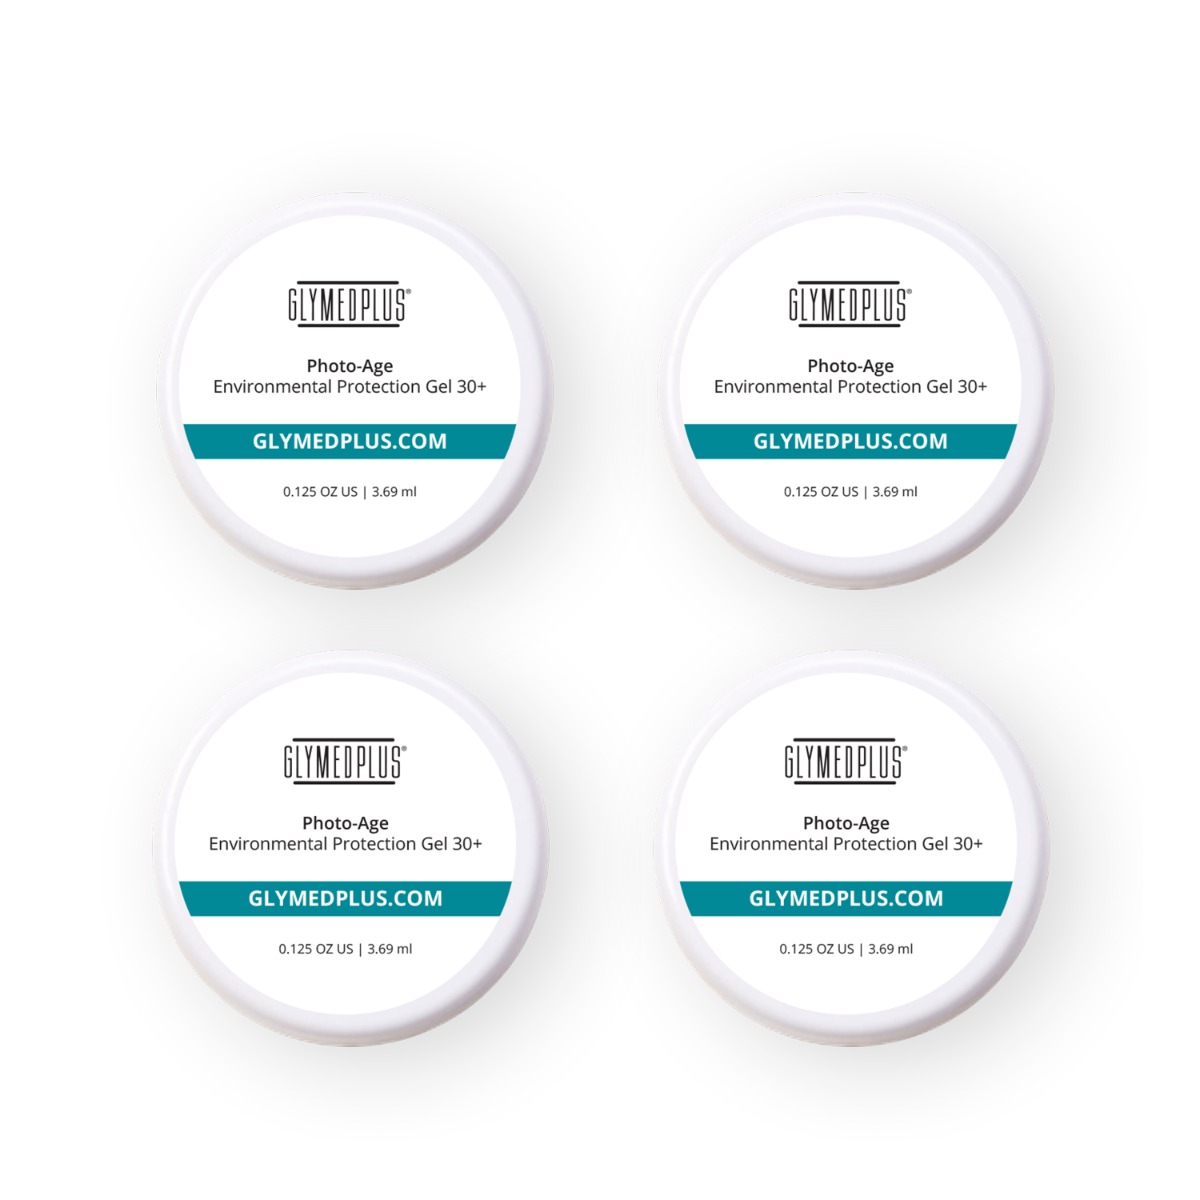 Photo-Age Environmental Protection Gel SPF 30+ - Sample 4 Pack